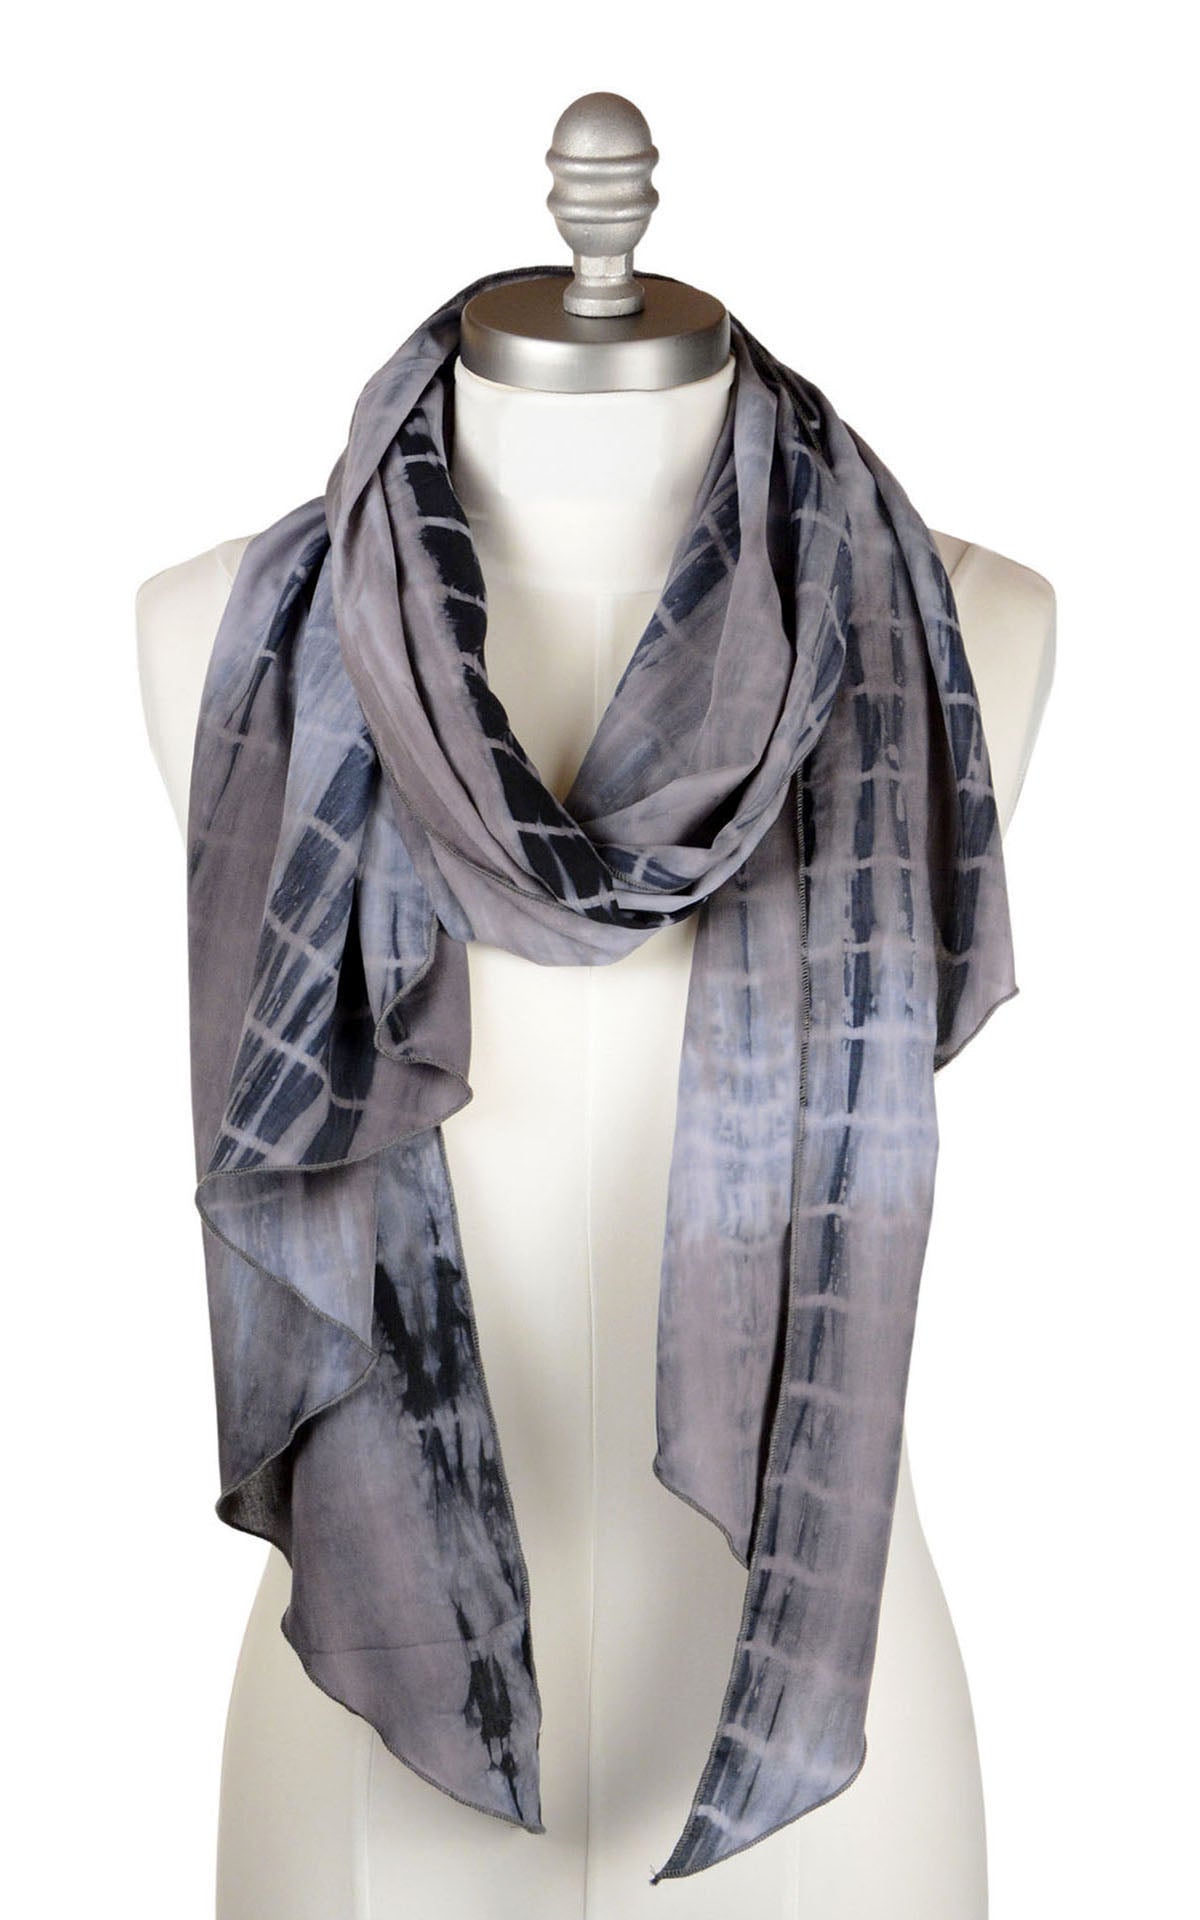 Handkerchief Scarf in Earl Grey, part of the Tea Time 2 Collection. LYC by Pandemonium is handmade in Seattle, WA, USA.